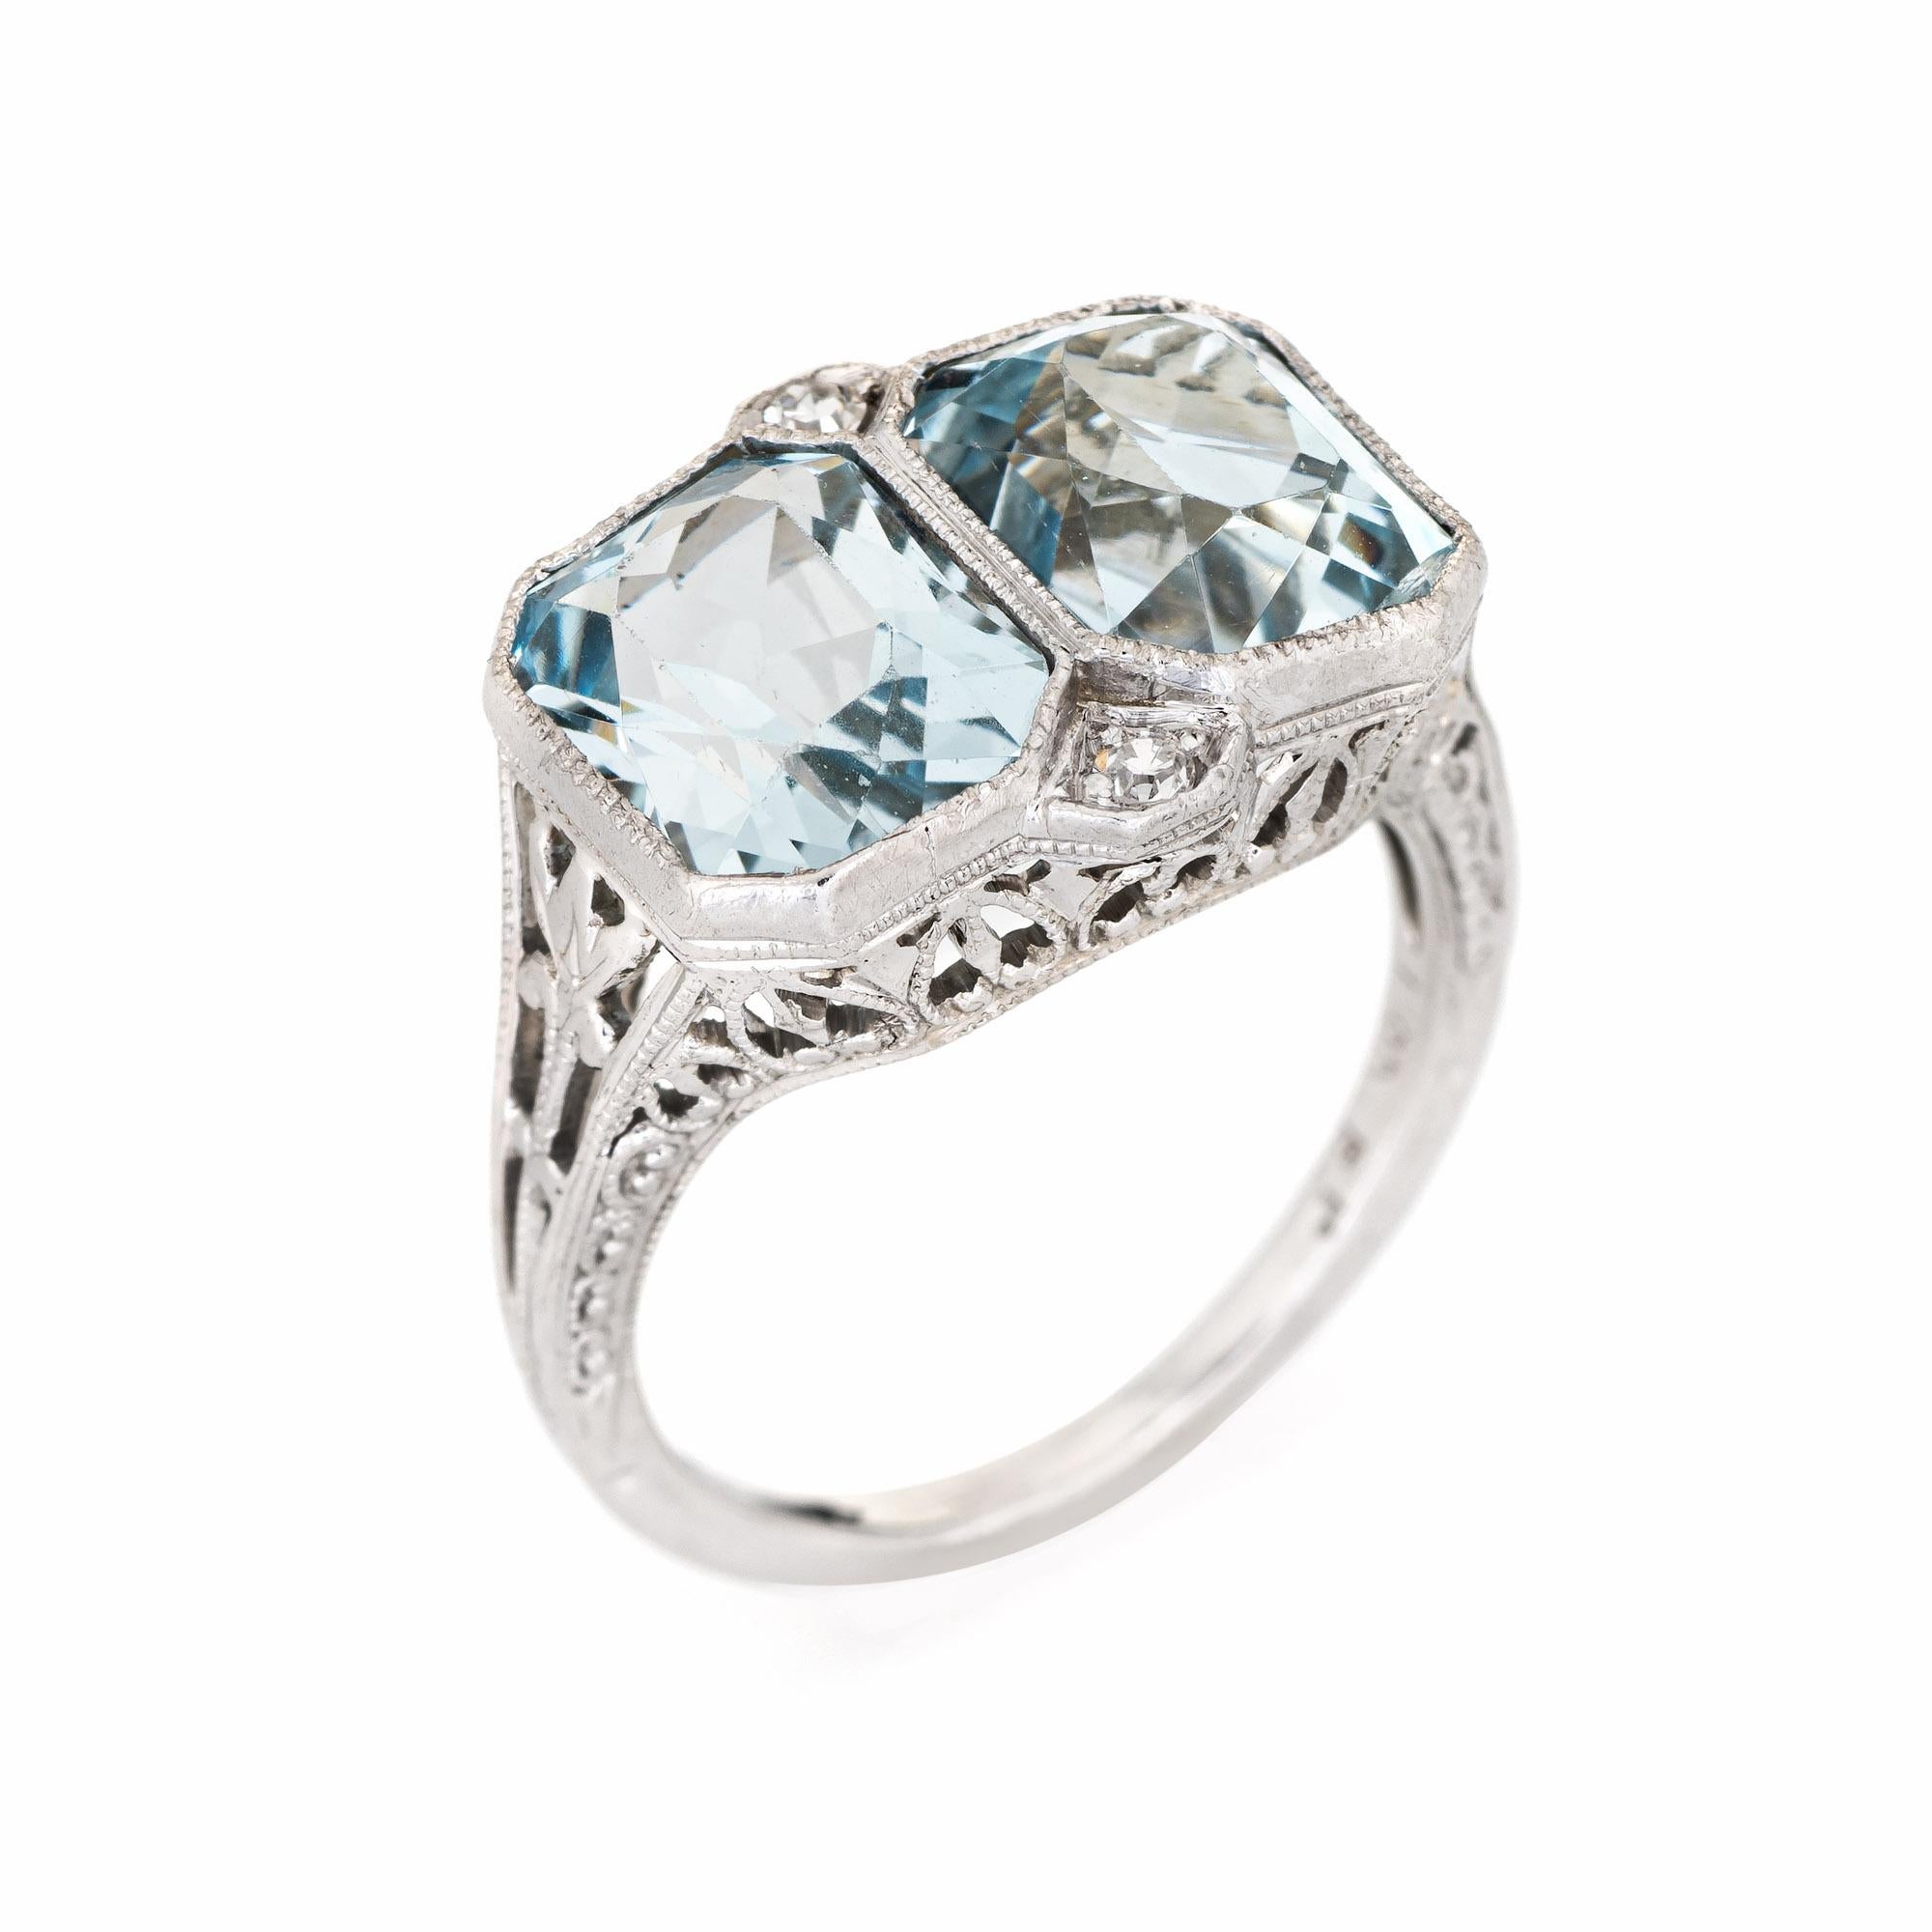 Finely detailed vintage Art Deco double aquamarine & diamond ring (circa 1920s to 1930s) crafted in 18k white gold. 

Two aquamarines measure 8.5mm x 7mm each (estimated at 2.50 carats each - 5 carats total estimated weight), accented with 0.04